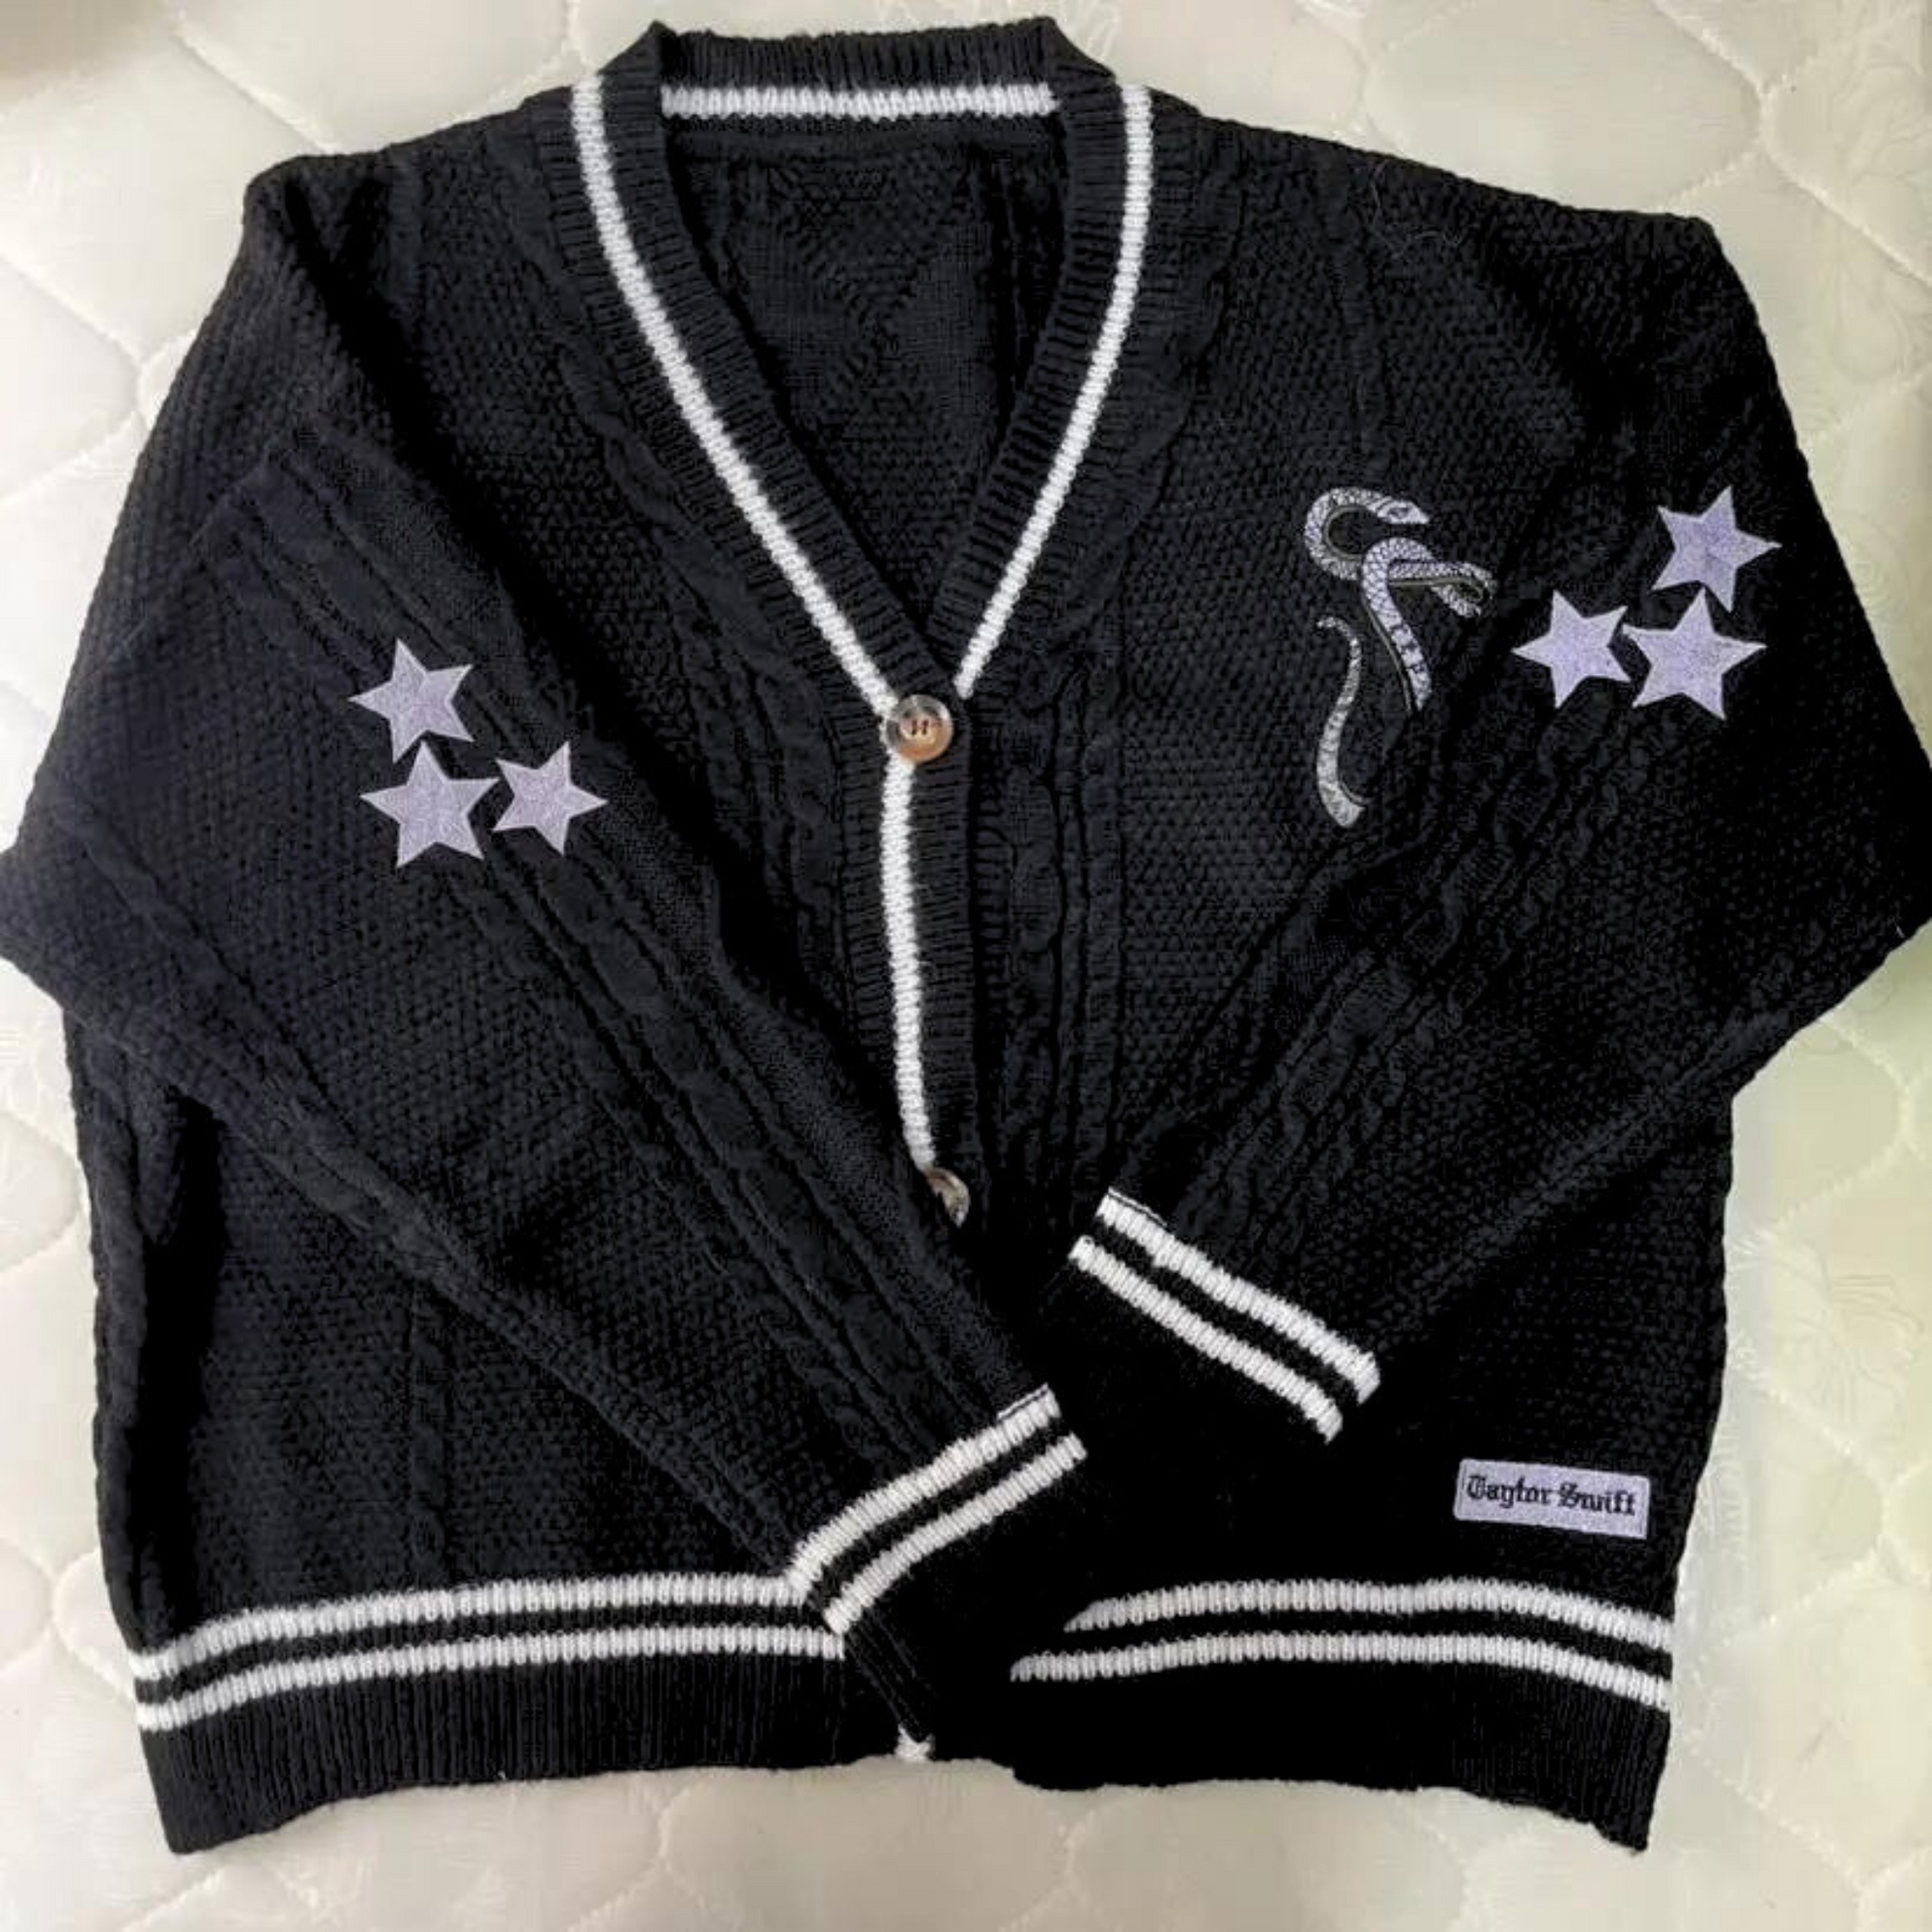 Taylor Swift Cardigan - NEW! LIMITED EDITION - M/L - IN HAND